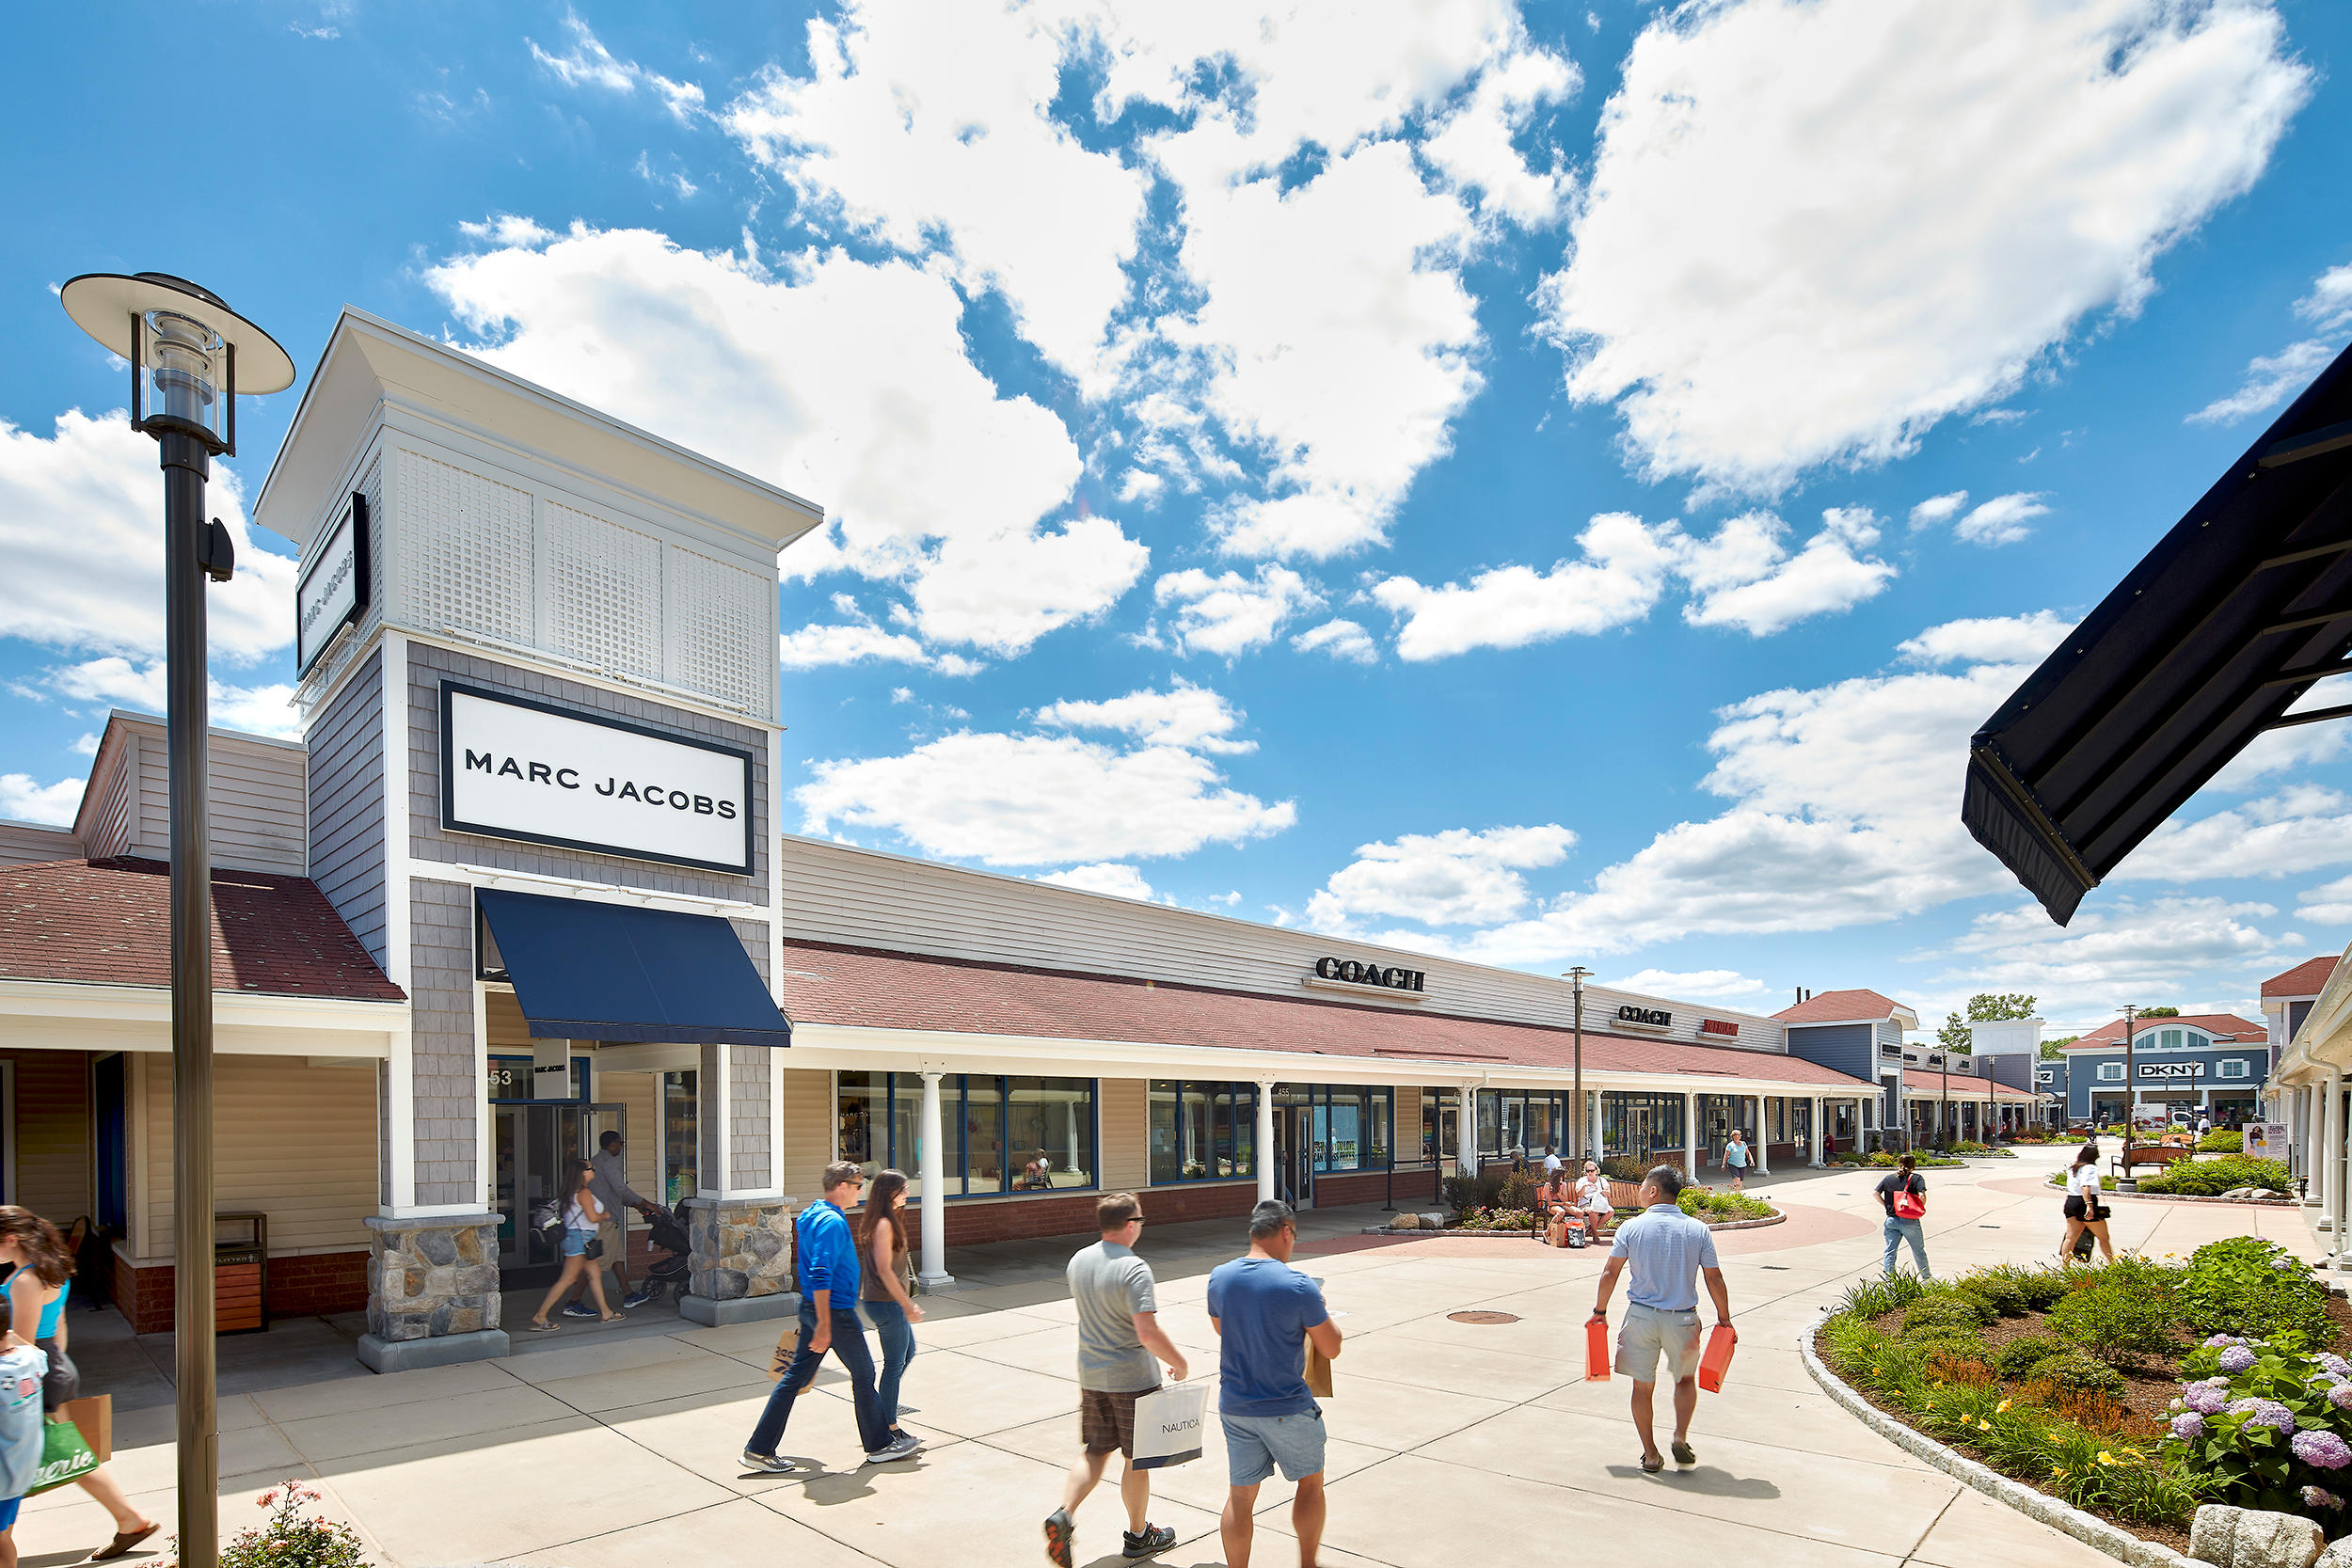 Wrentham Village Premium Outlets - Outlet Mall - Wrentham, MA 02093